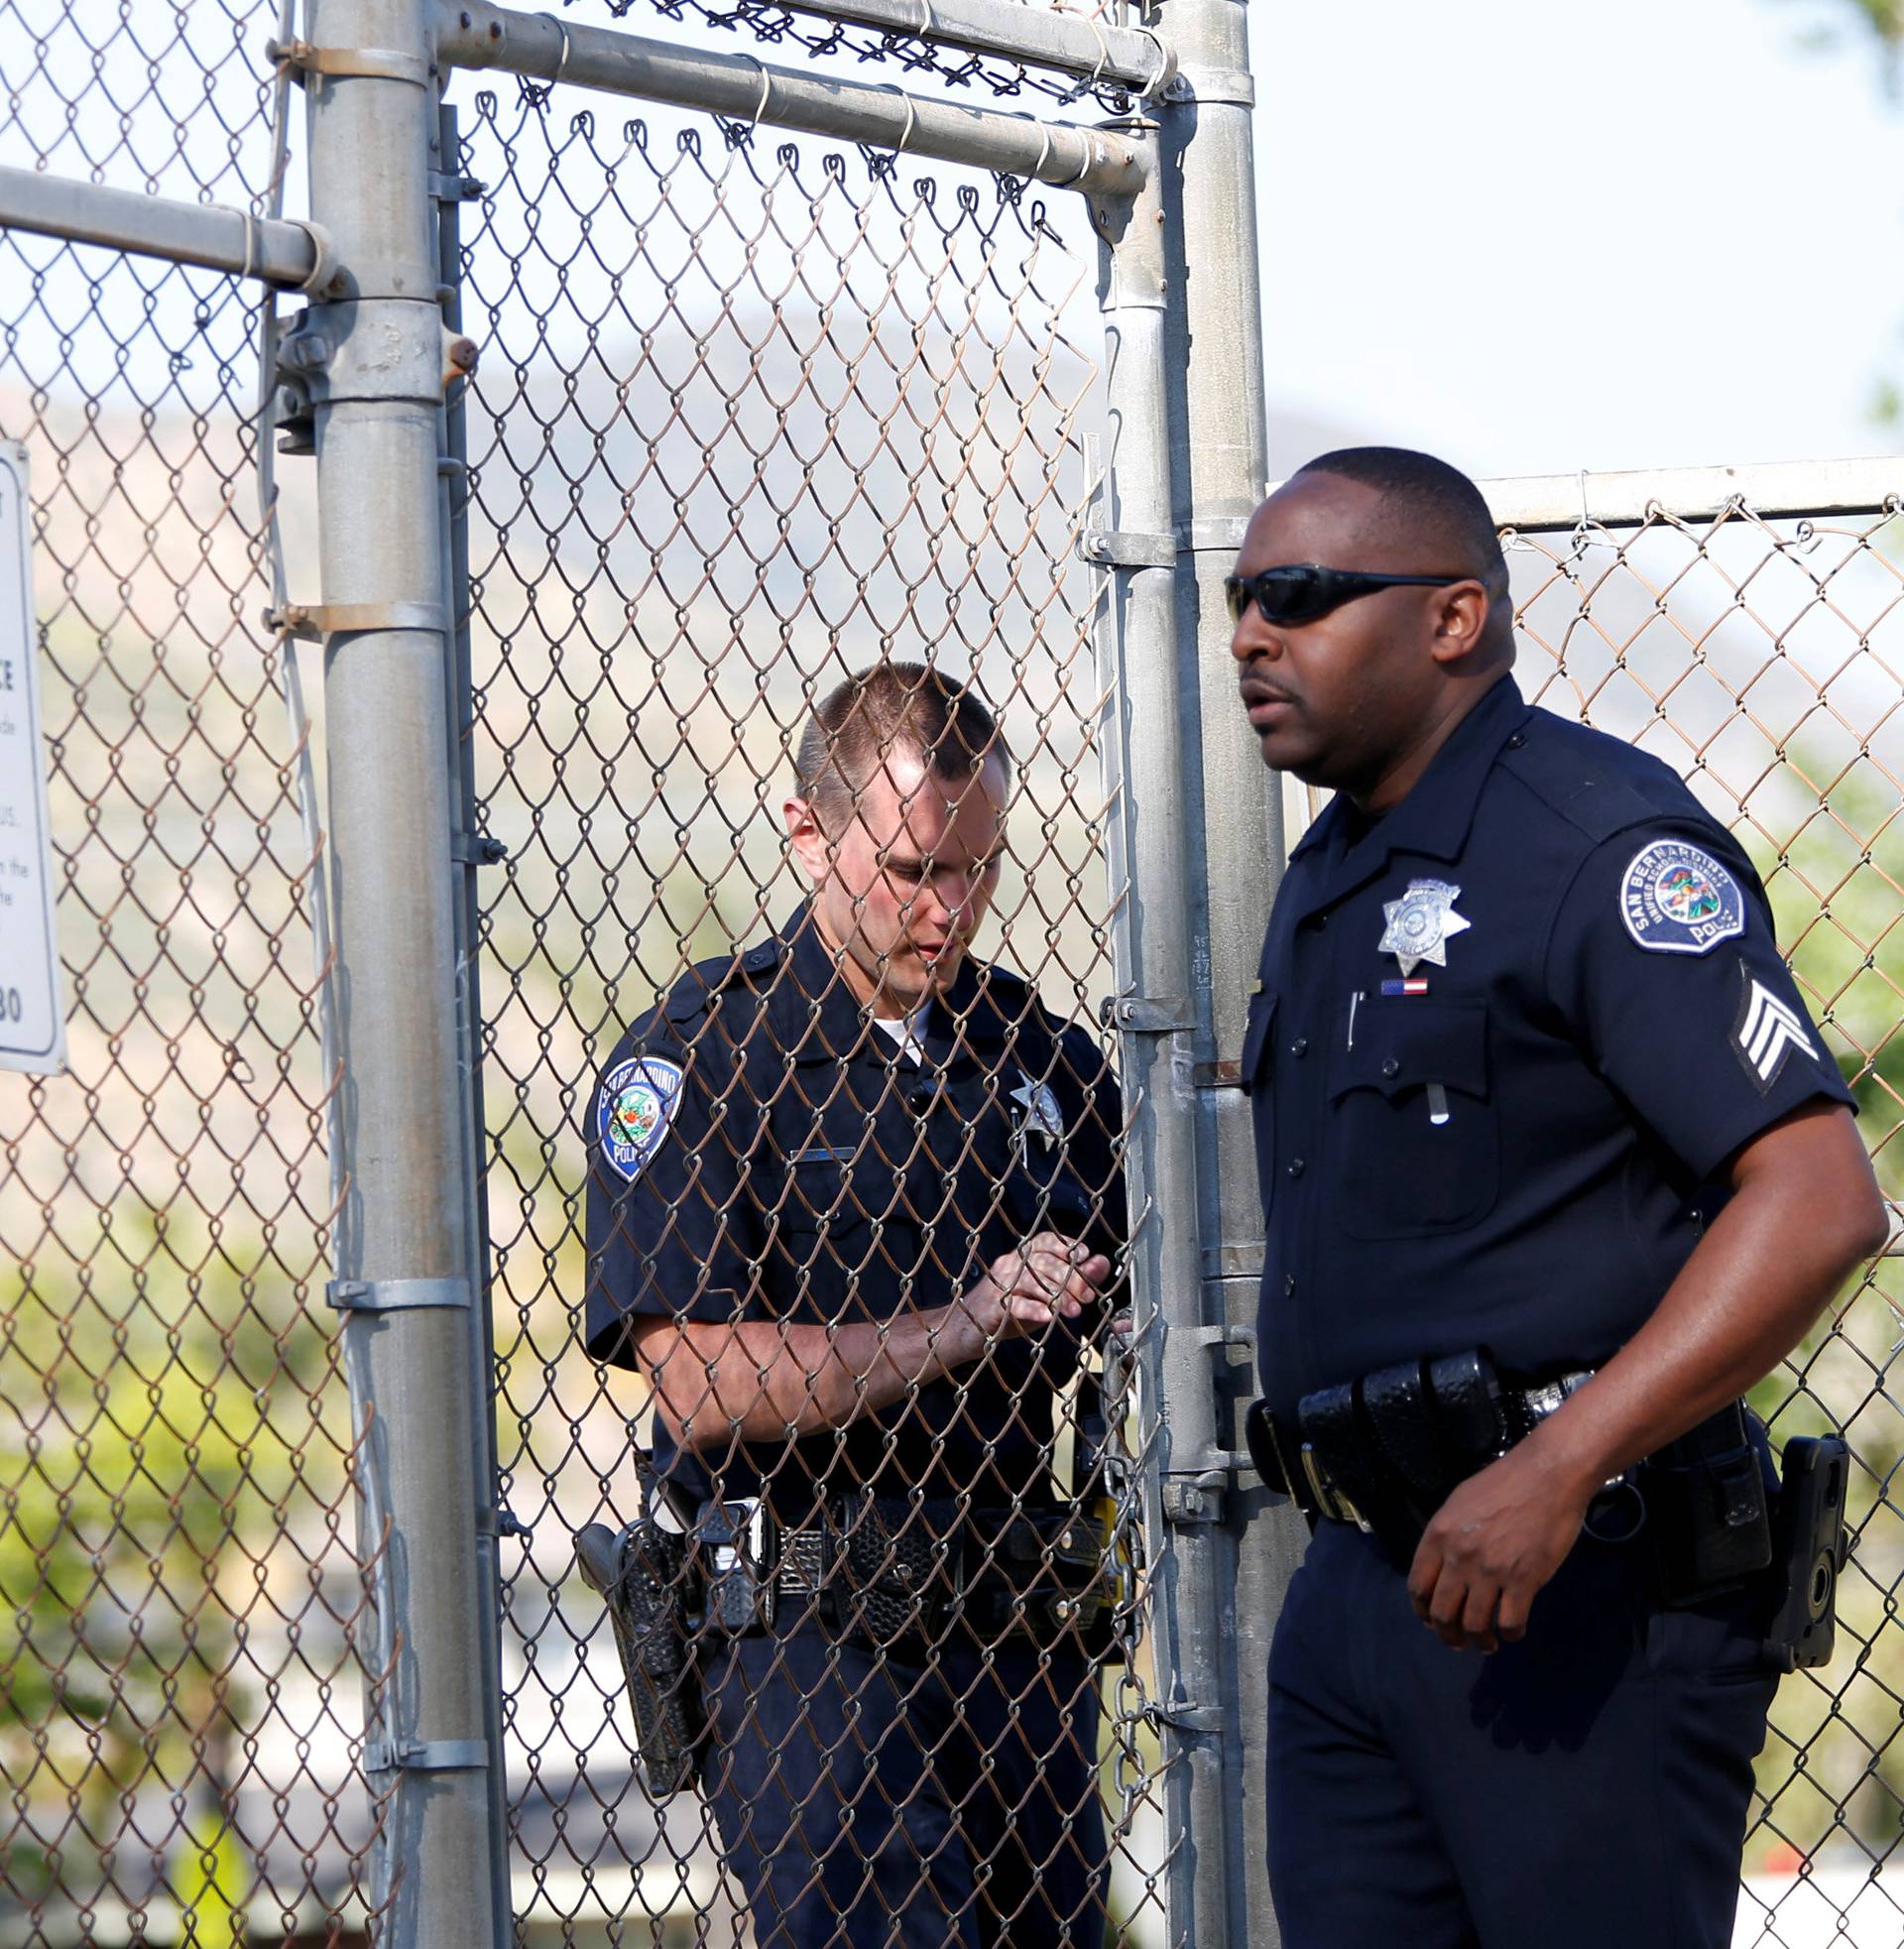 Police officers lock a gate after a shooting at North Park Elementary School in San Bernardino